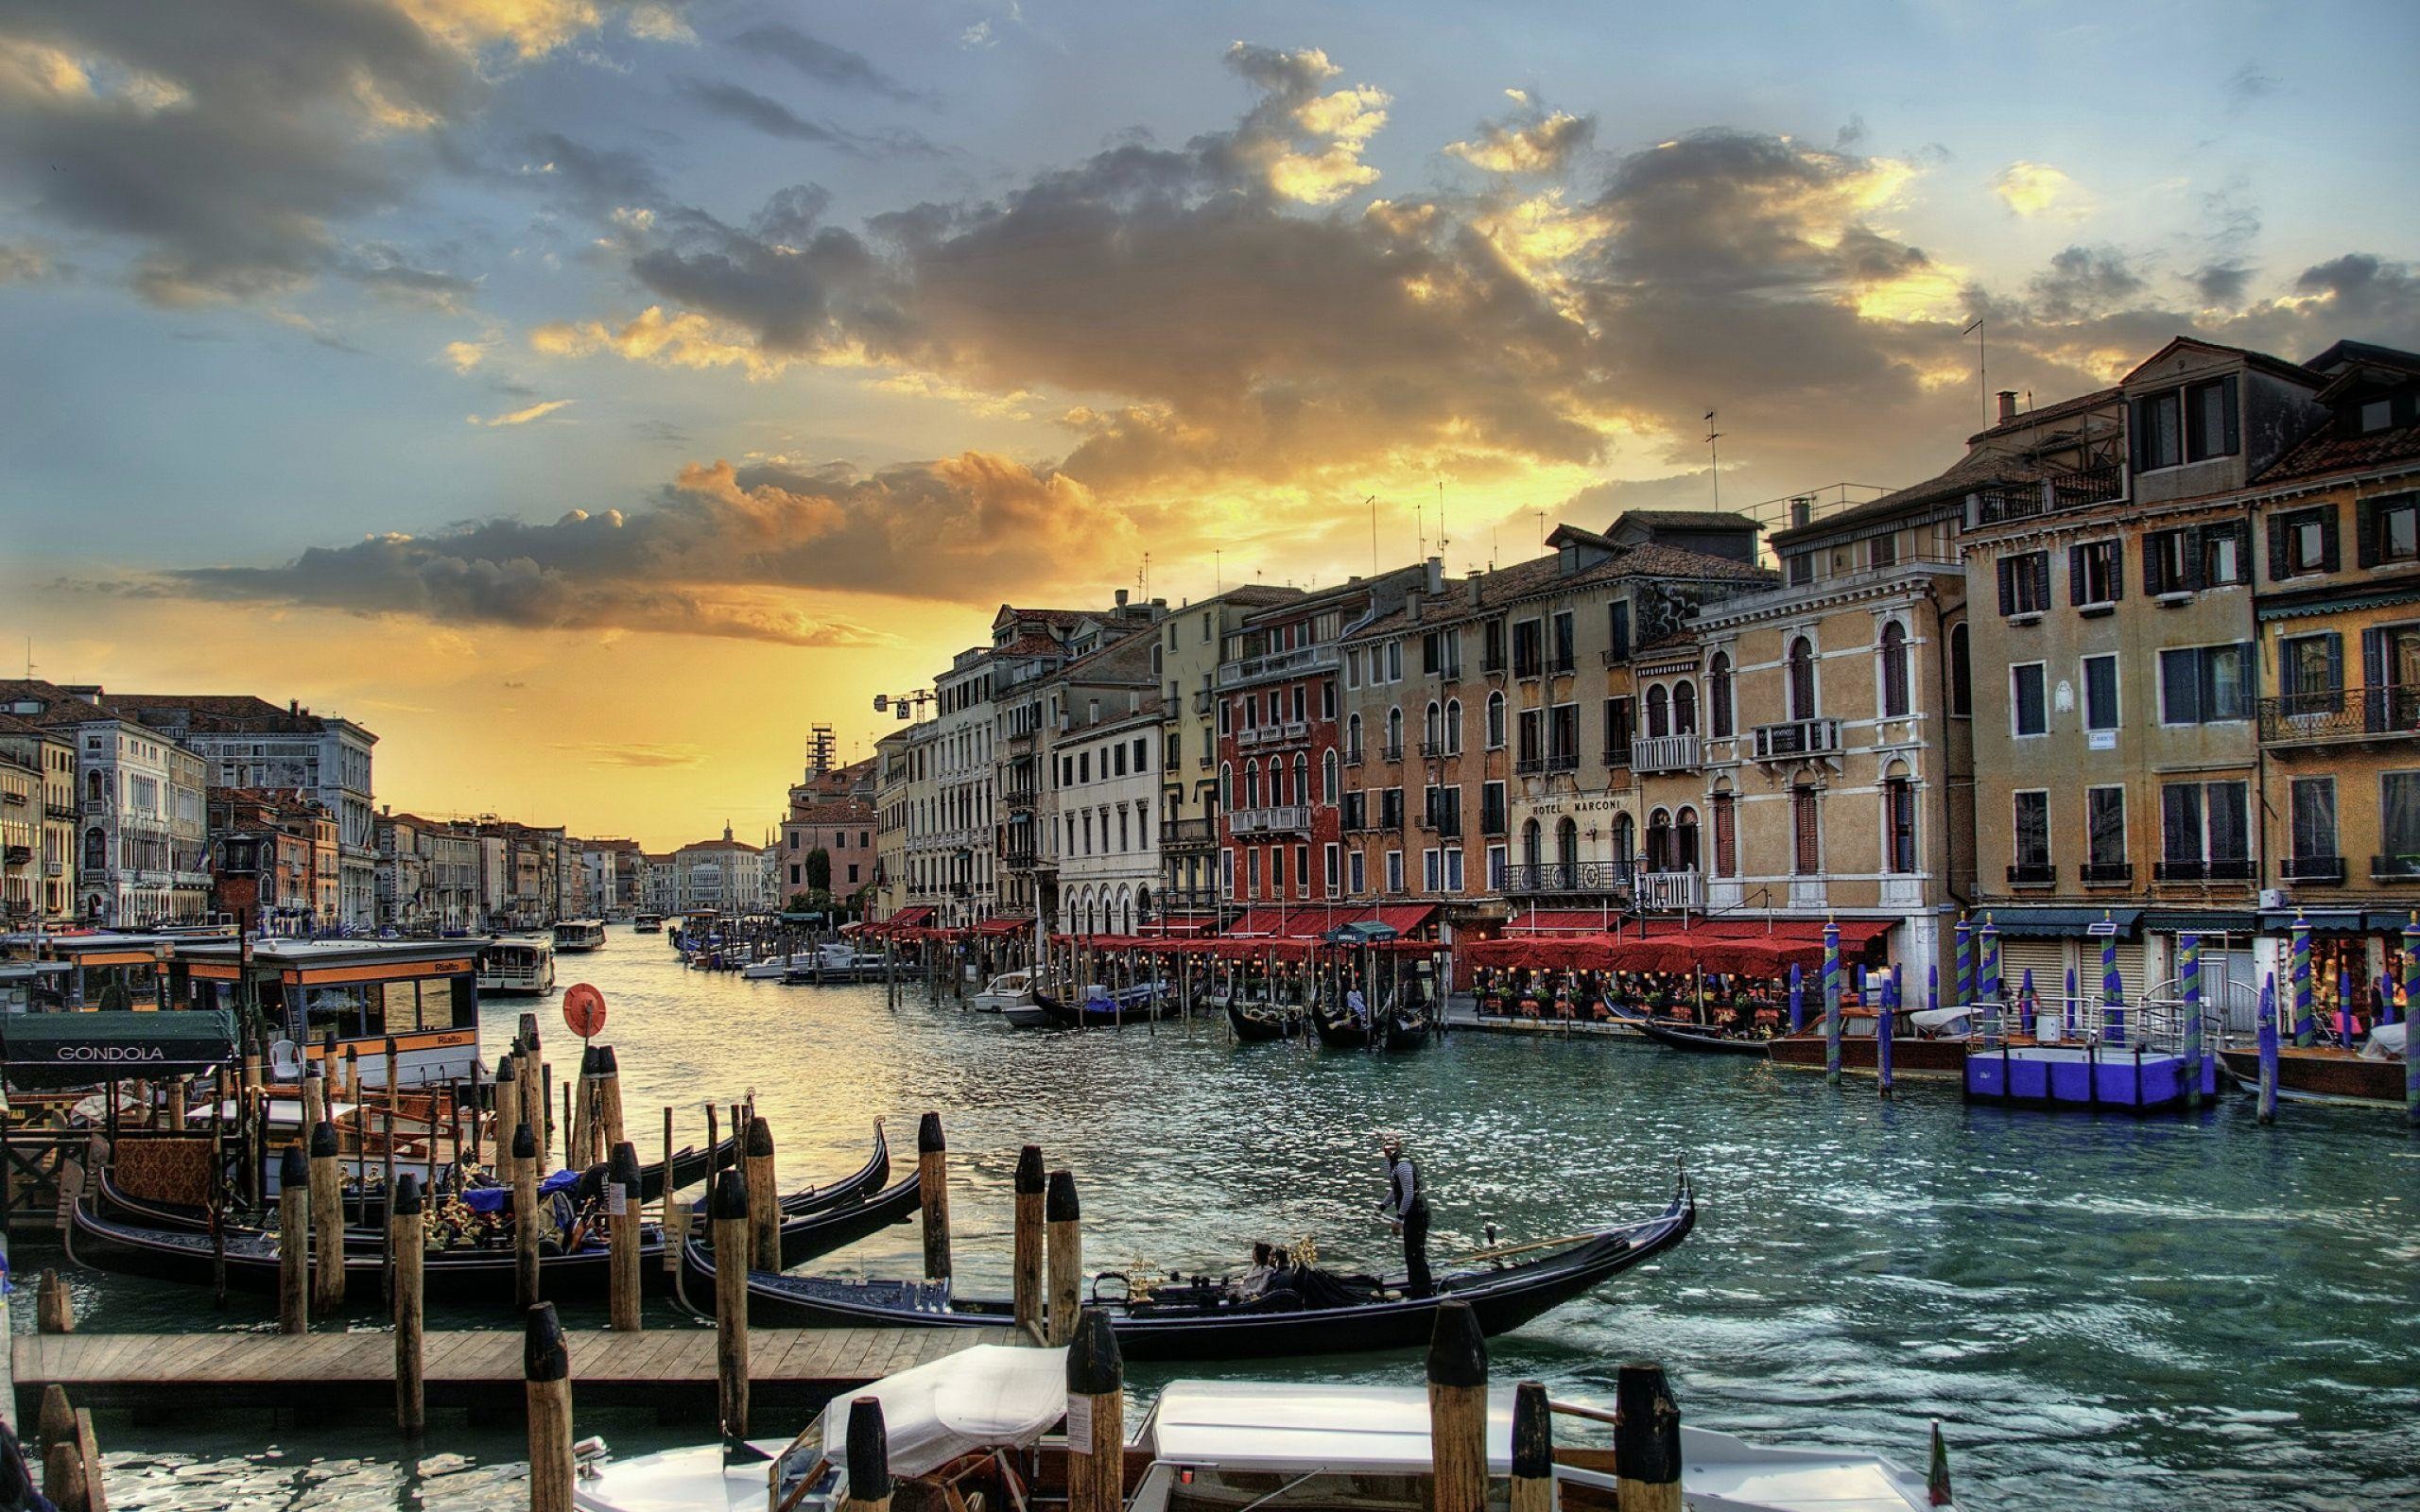 2560x1600 Venice Italy Wallpaper Download HD For Desktop and Mobile